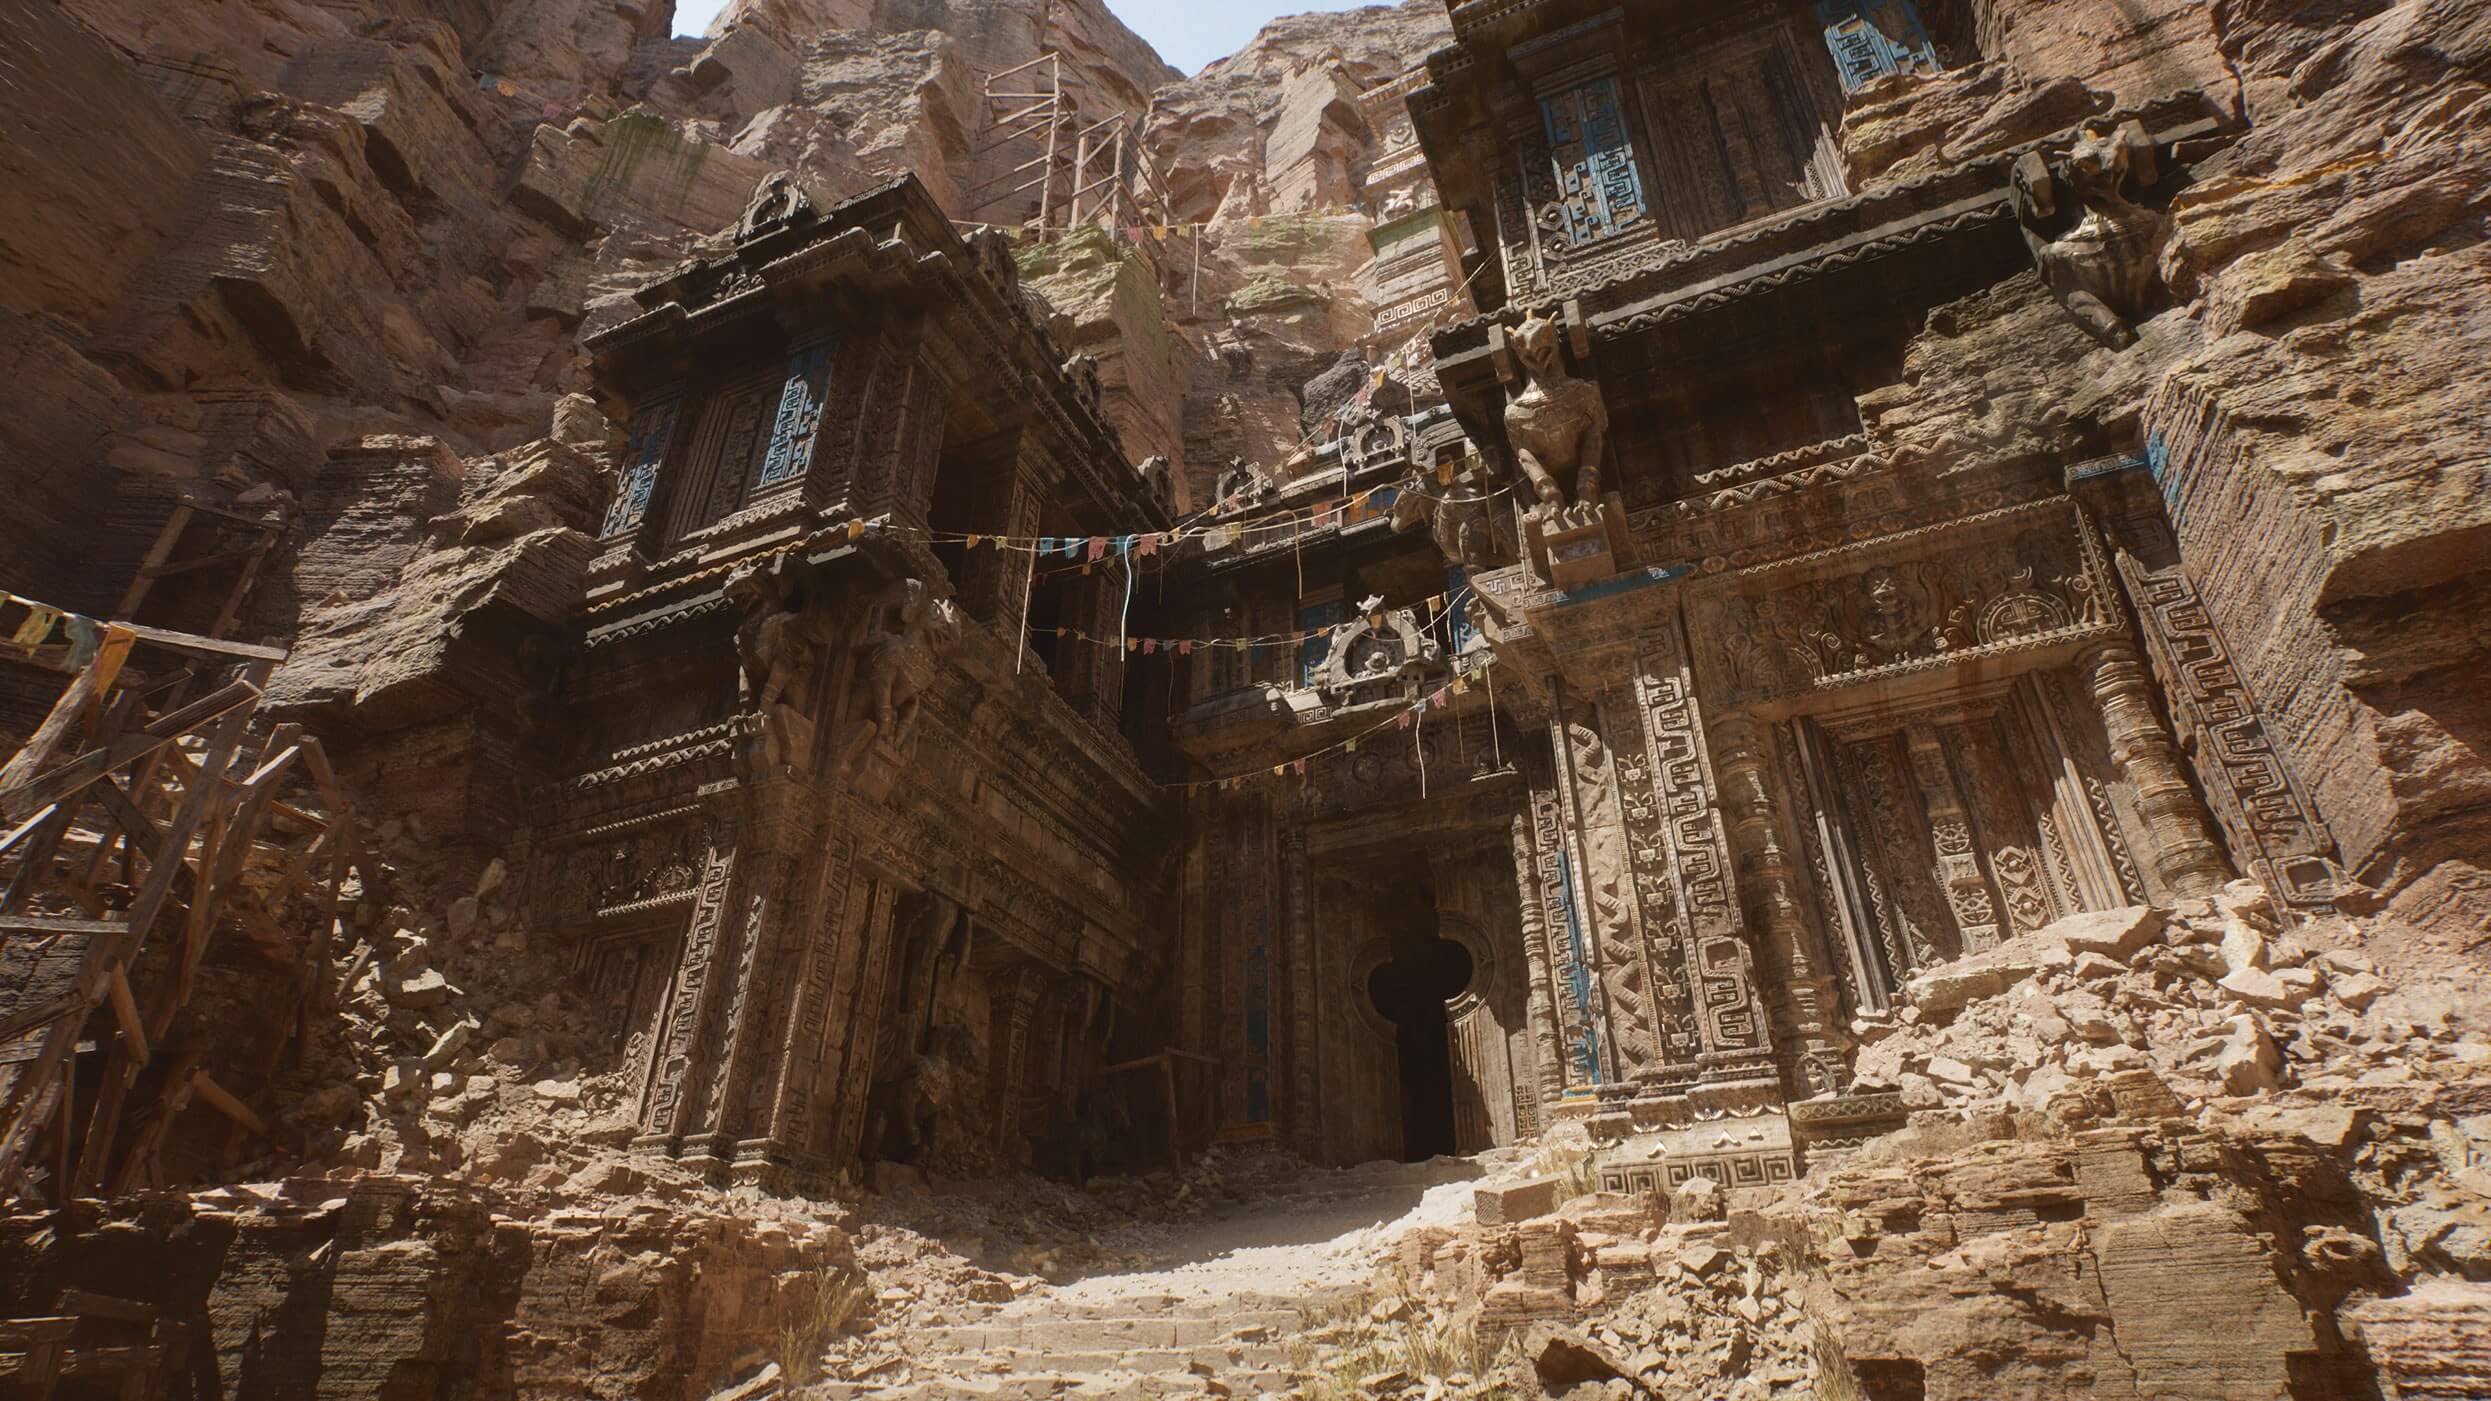 Unreal Engine 5's new Lumen and Nanite systems brings near photorealistic environments to the PS5